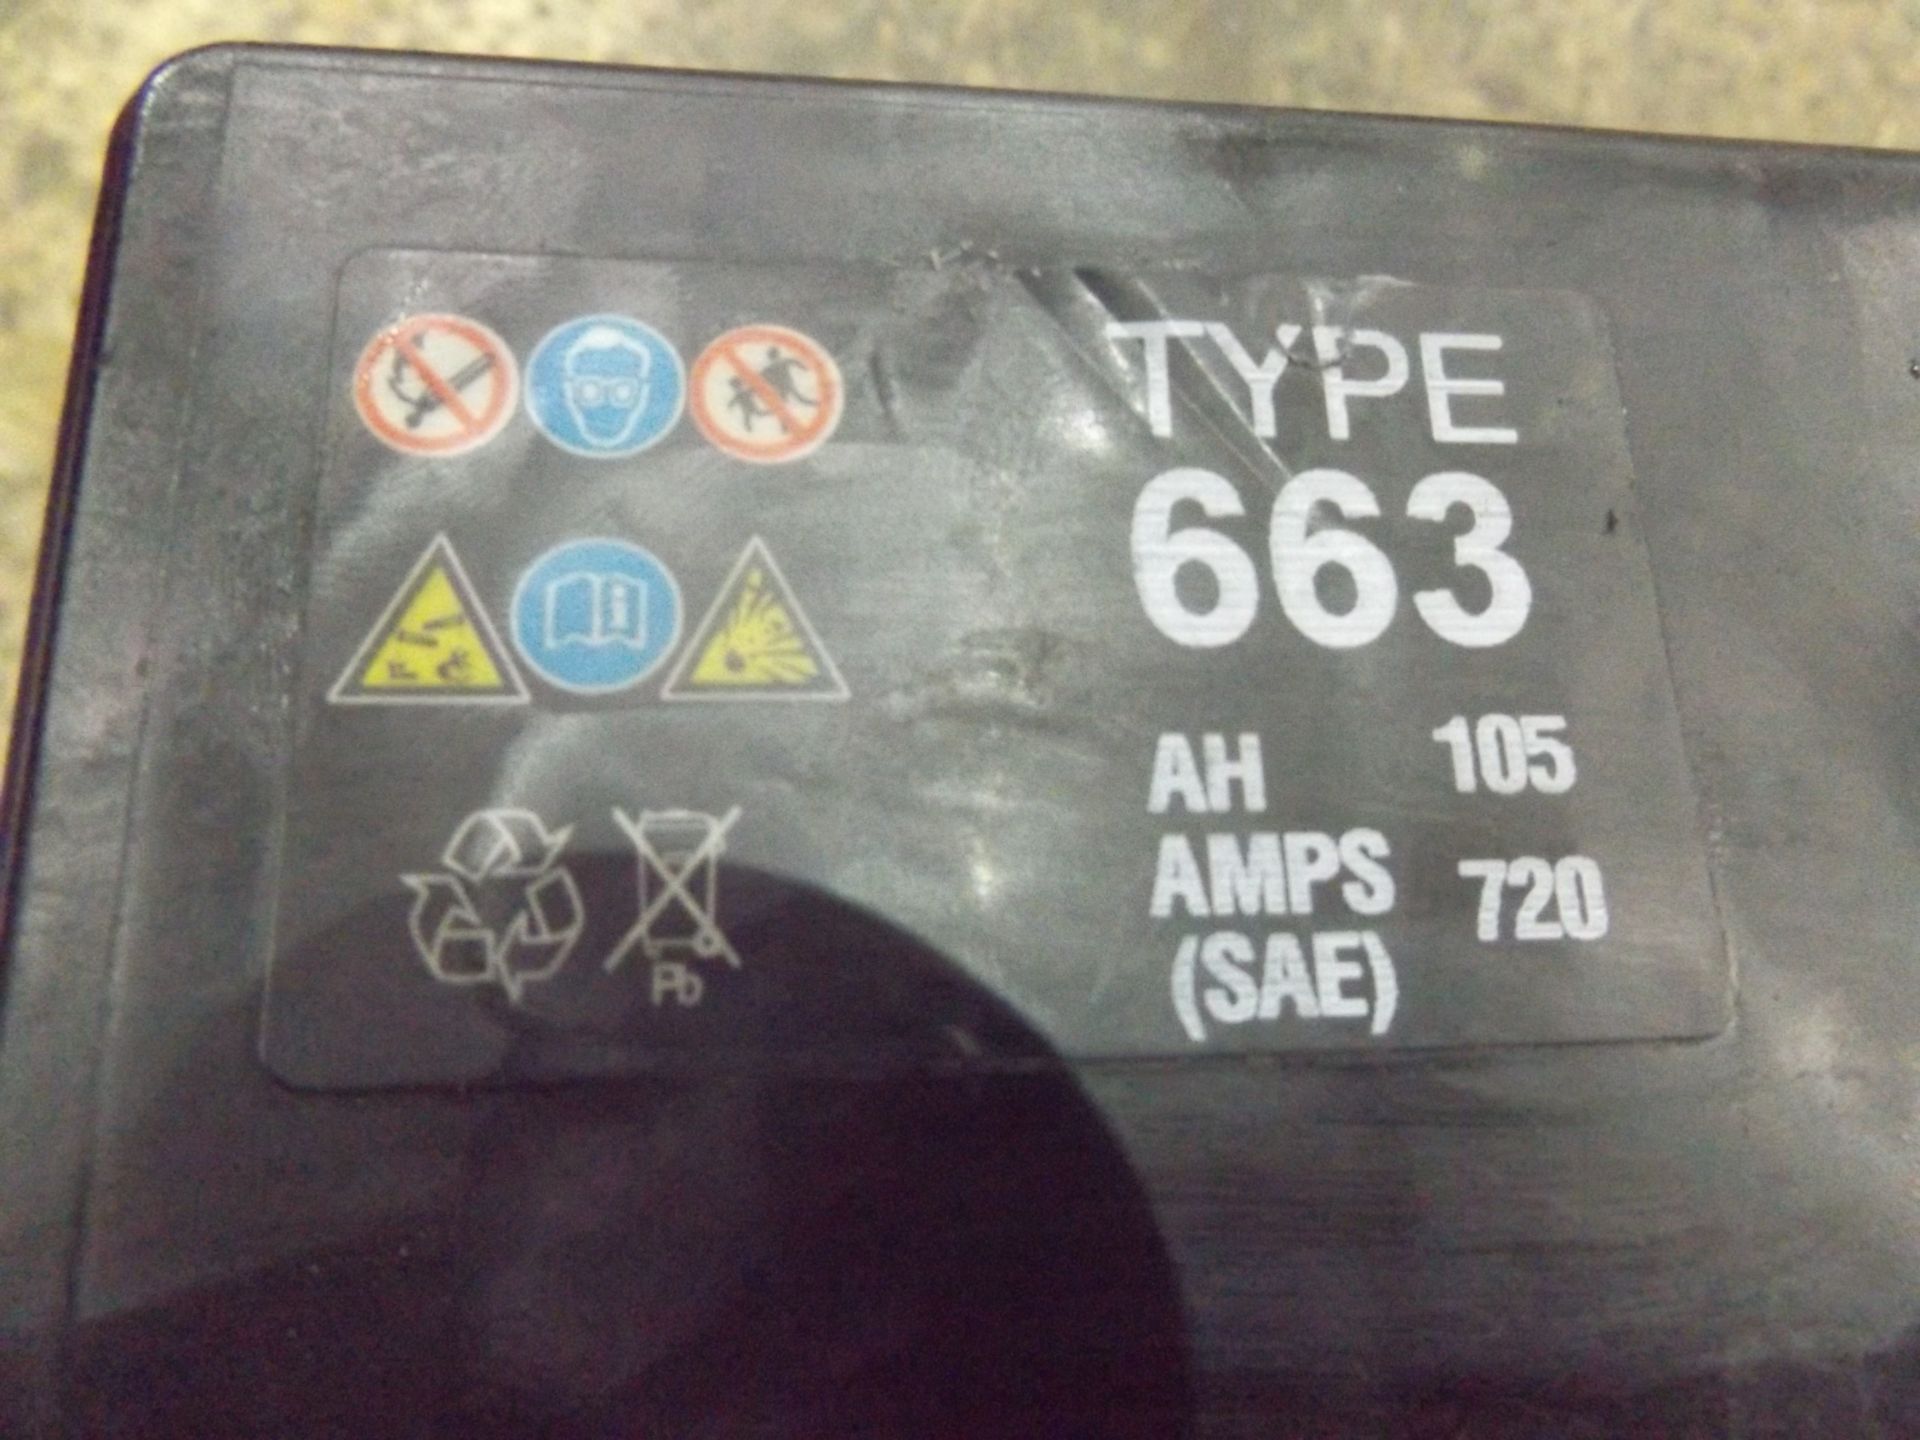 You are bidding on Direct from the UK Ministry Of Defence 3 x Carwood Type 663 105 AH 720 AMP ( - Image 4 of 5